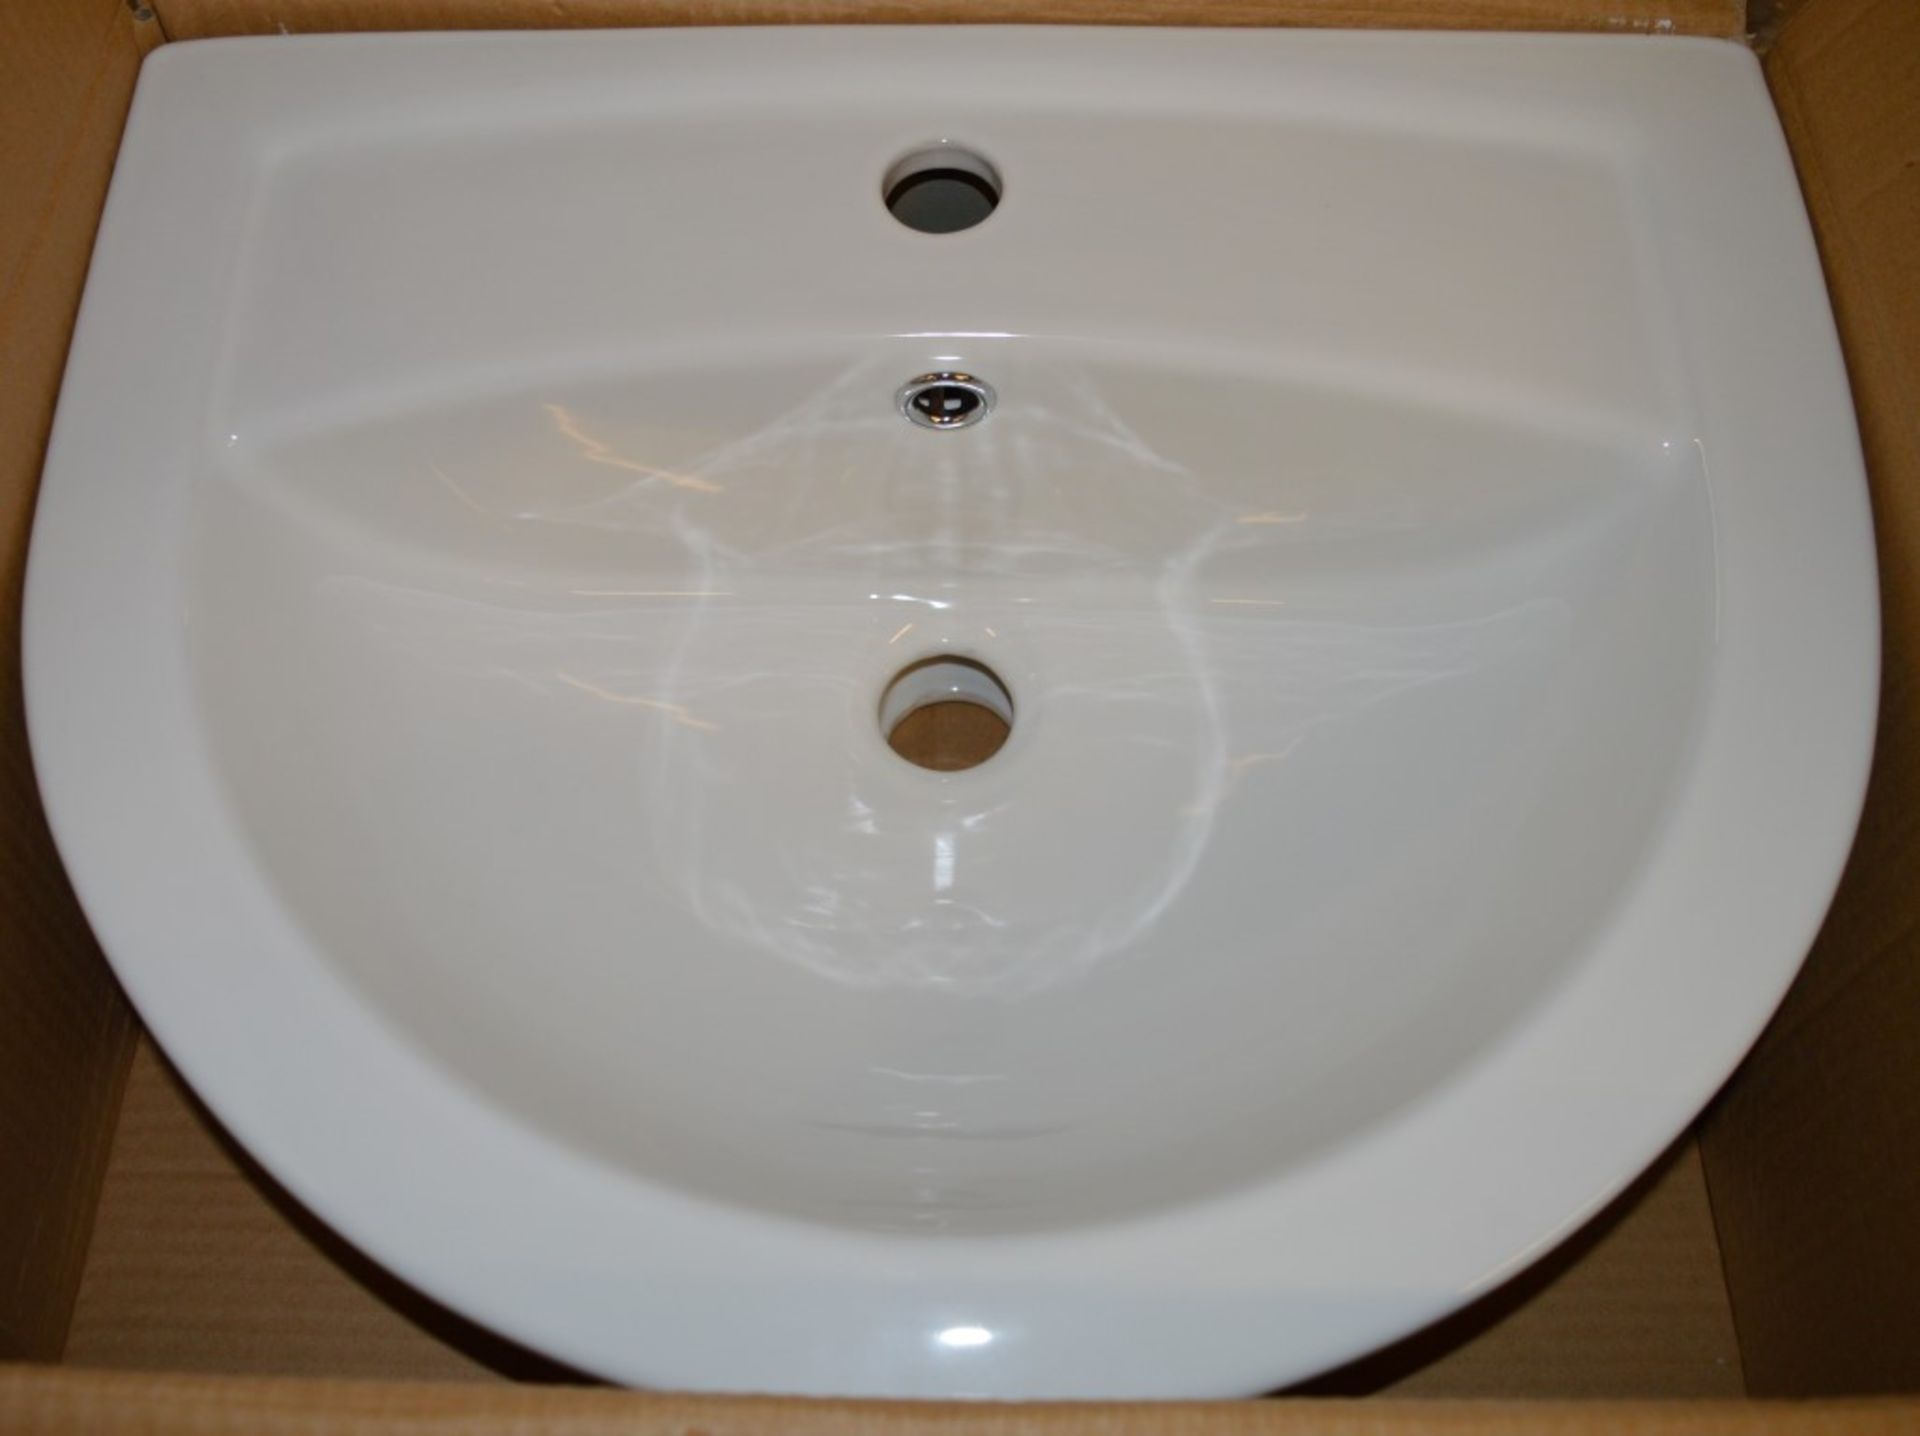 10 x Vogue Zoe Sink Basin & Toilet Sets - 1th 500mm Sink Basin With Full Pedestal and Back to Wall - Image 8 of 8